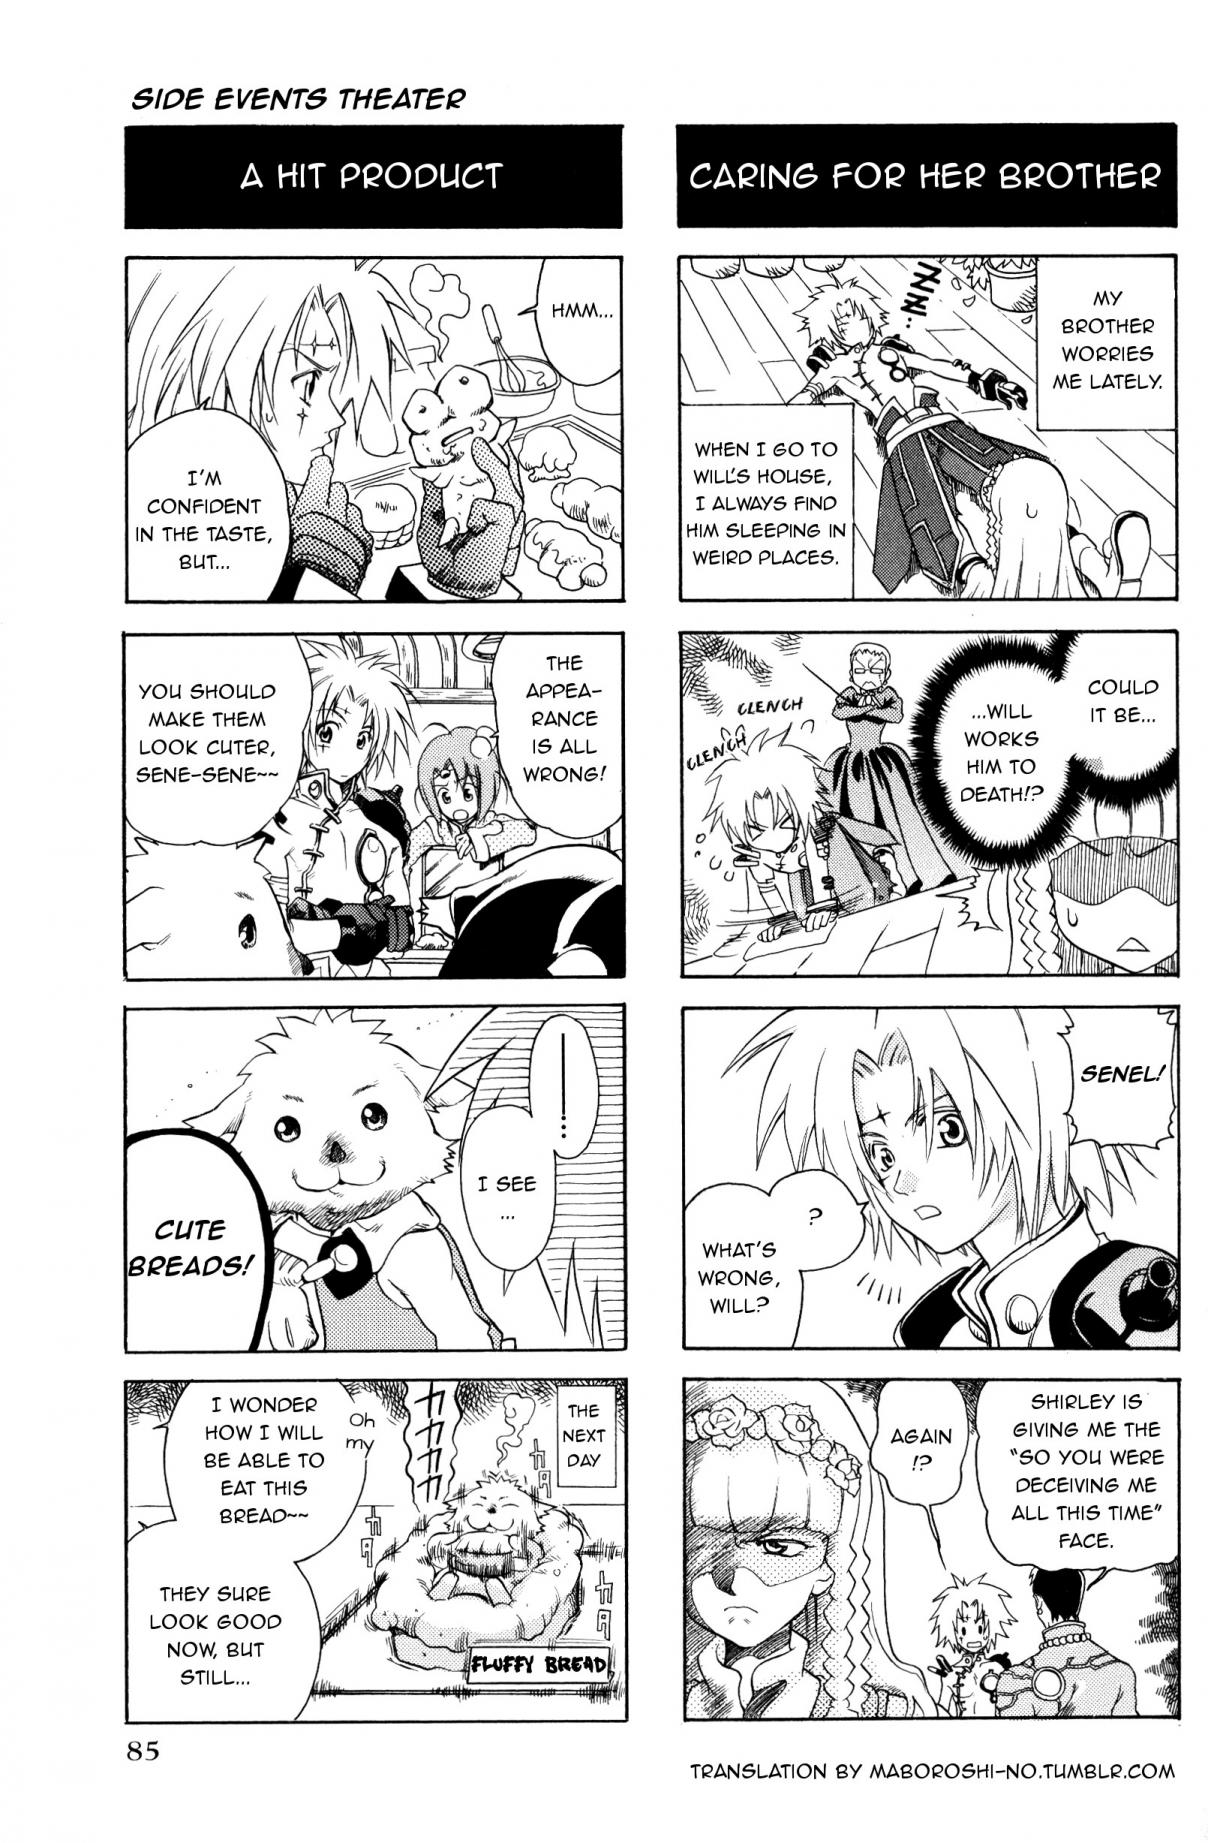 Tales of Legendia 4Koma Kings Vol. 1 Ch. 14 Side events theater